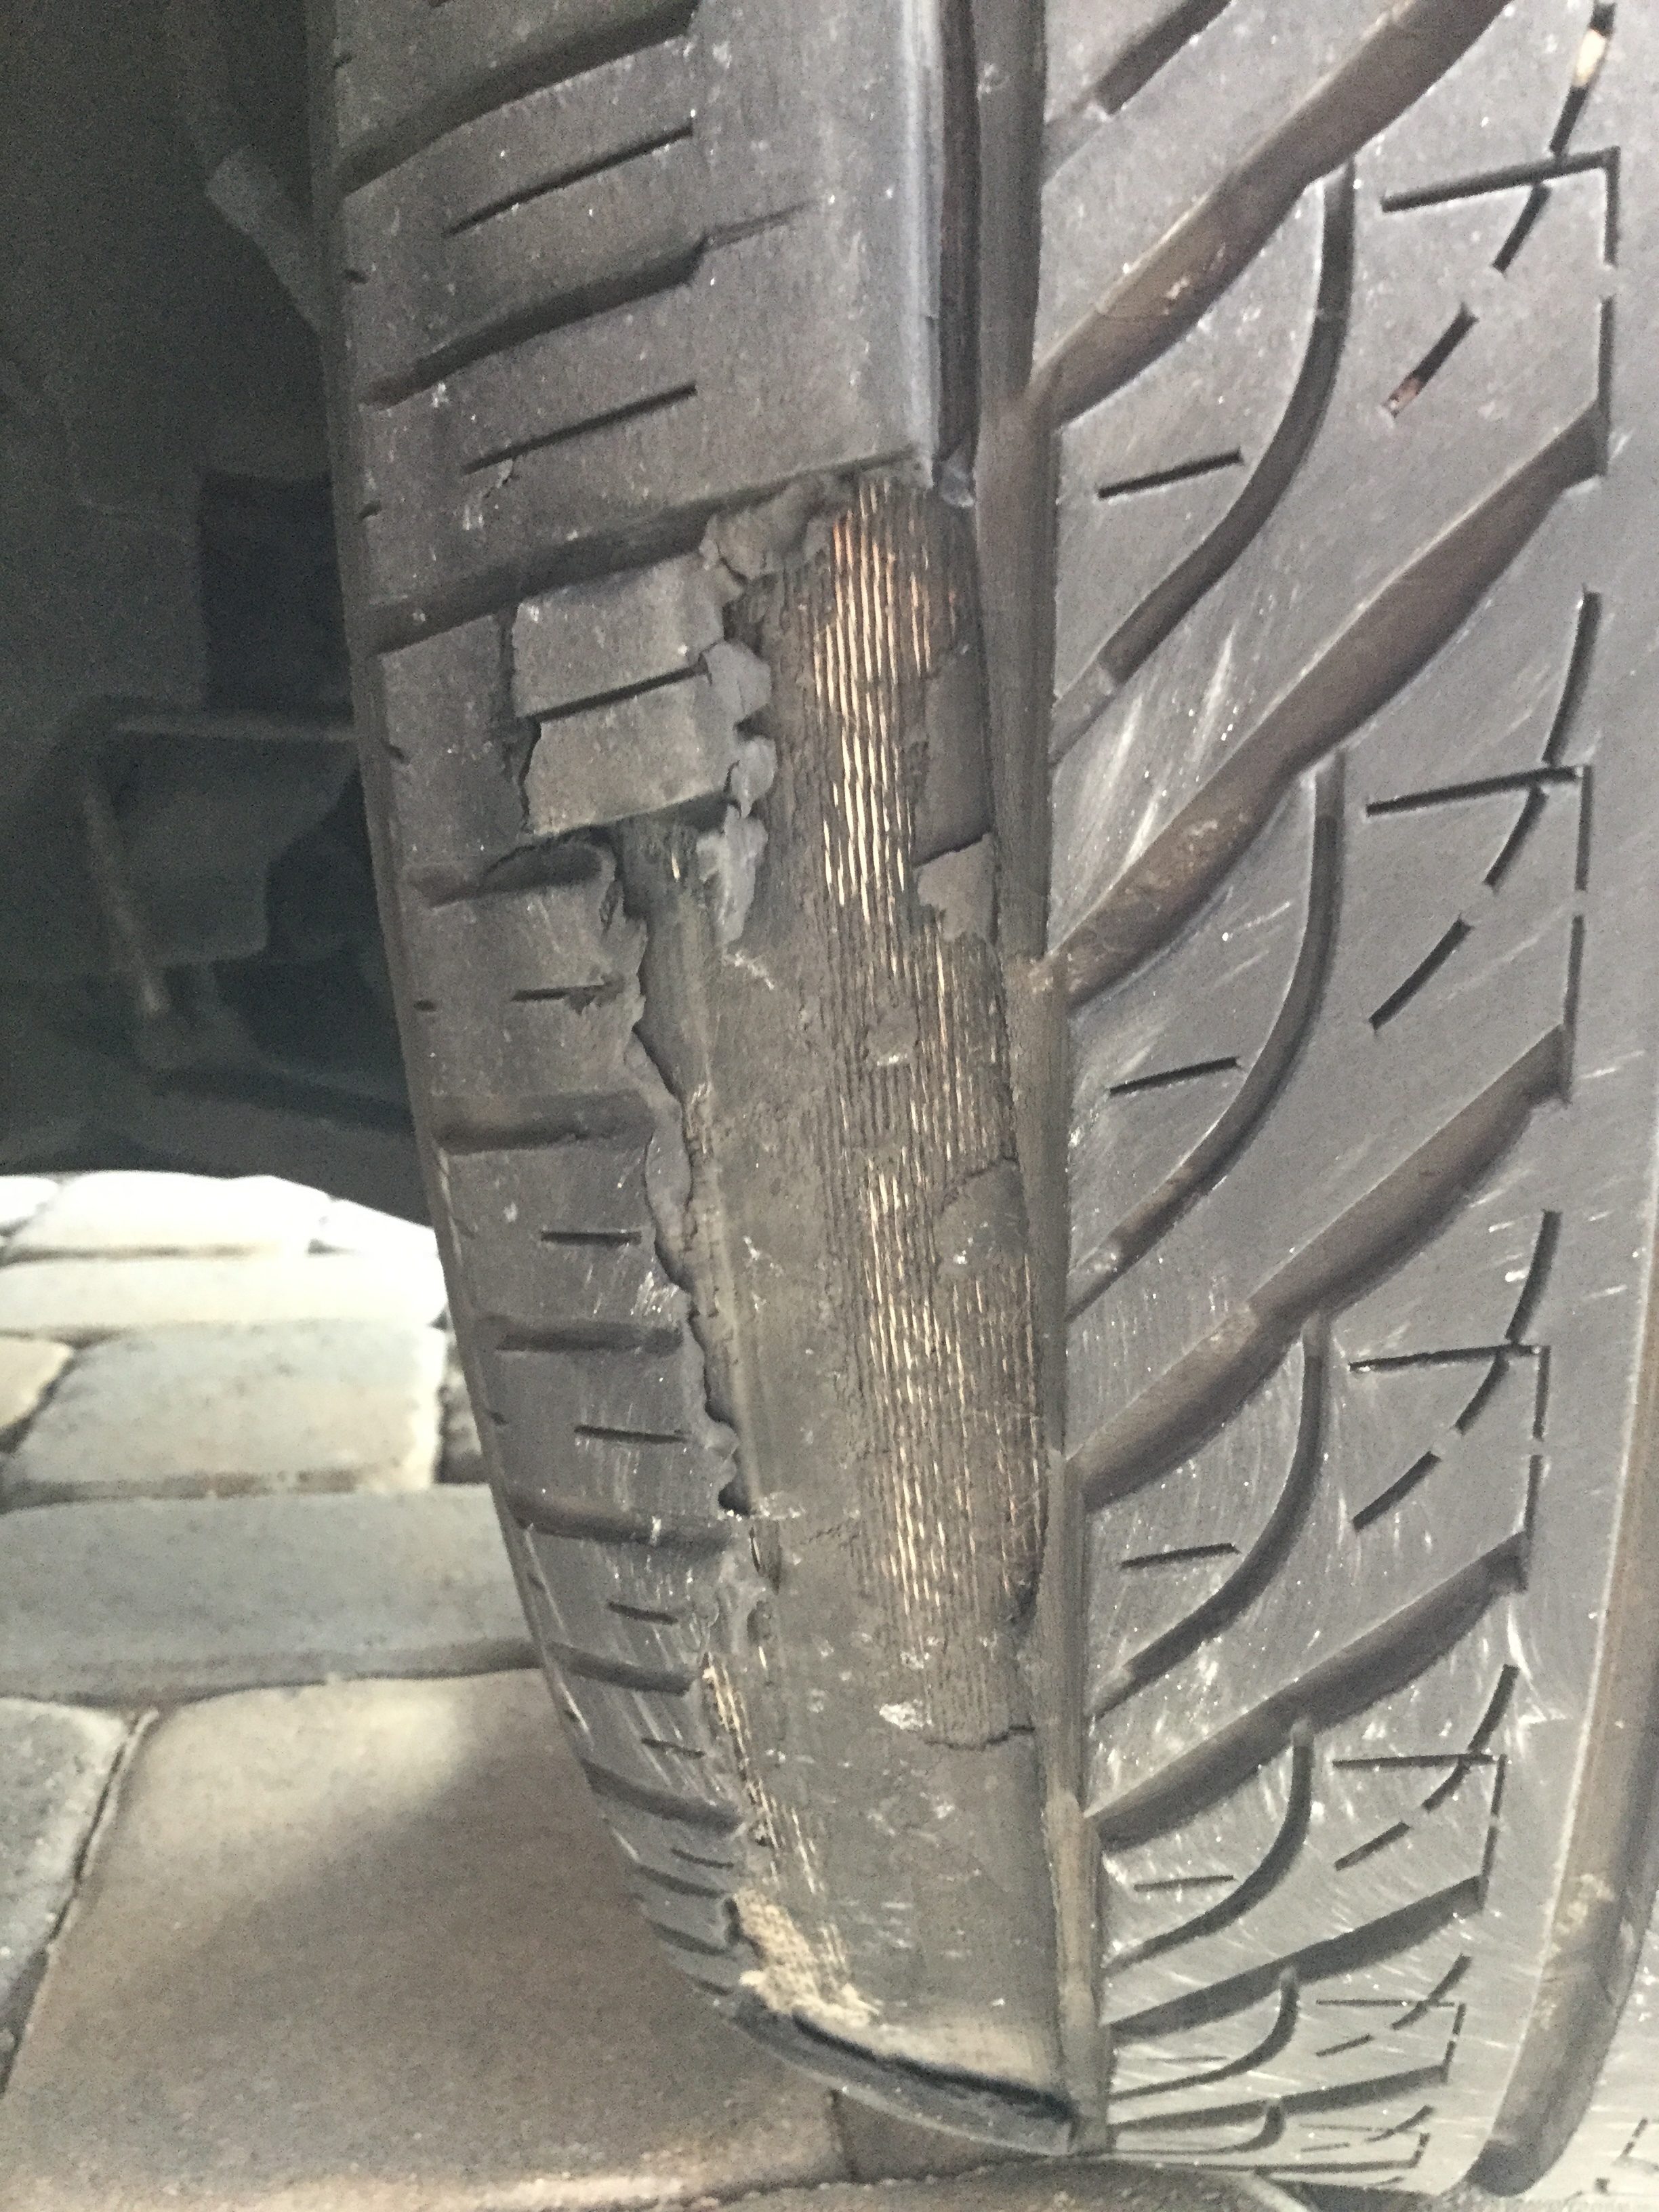 Are flat spots on tires dangerous?